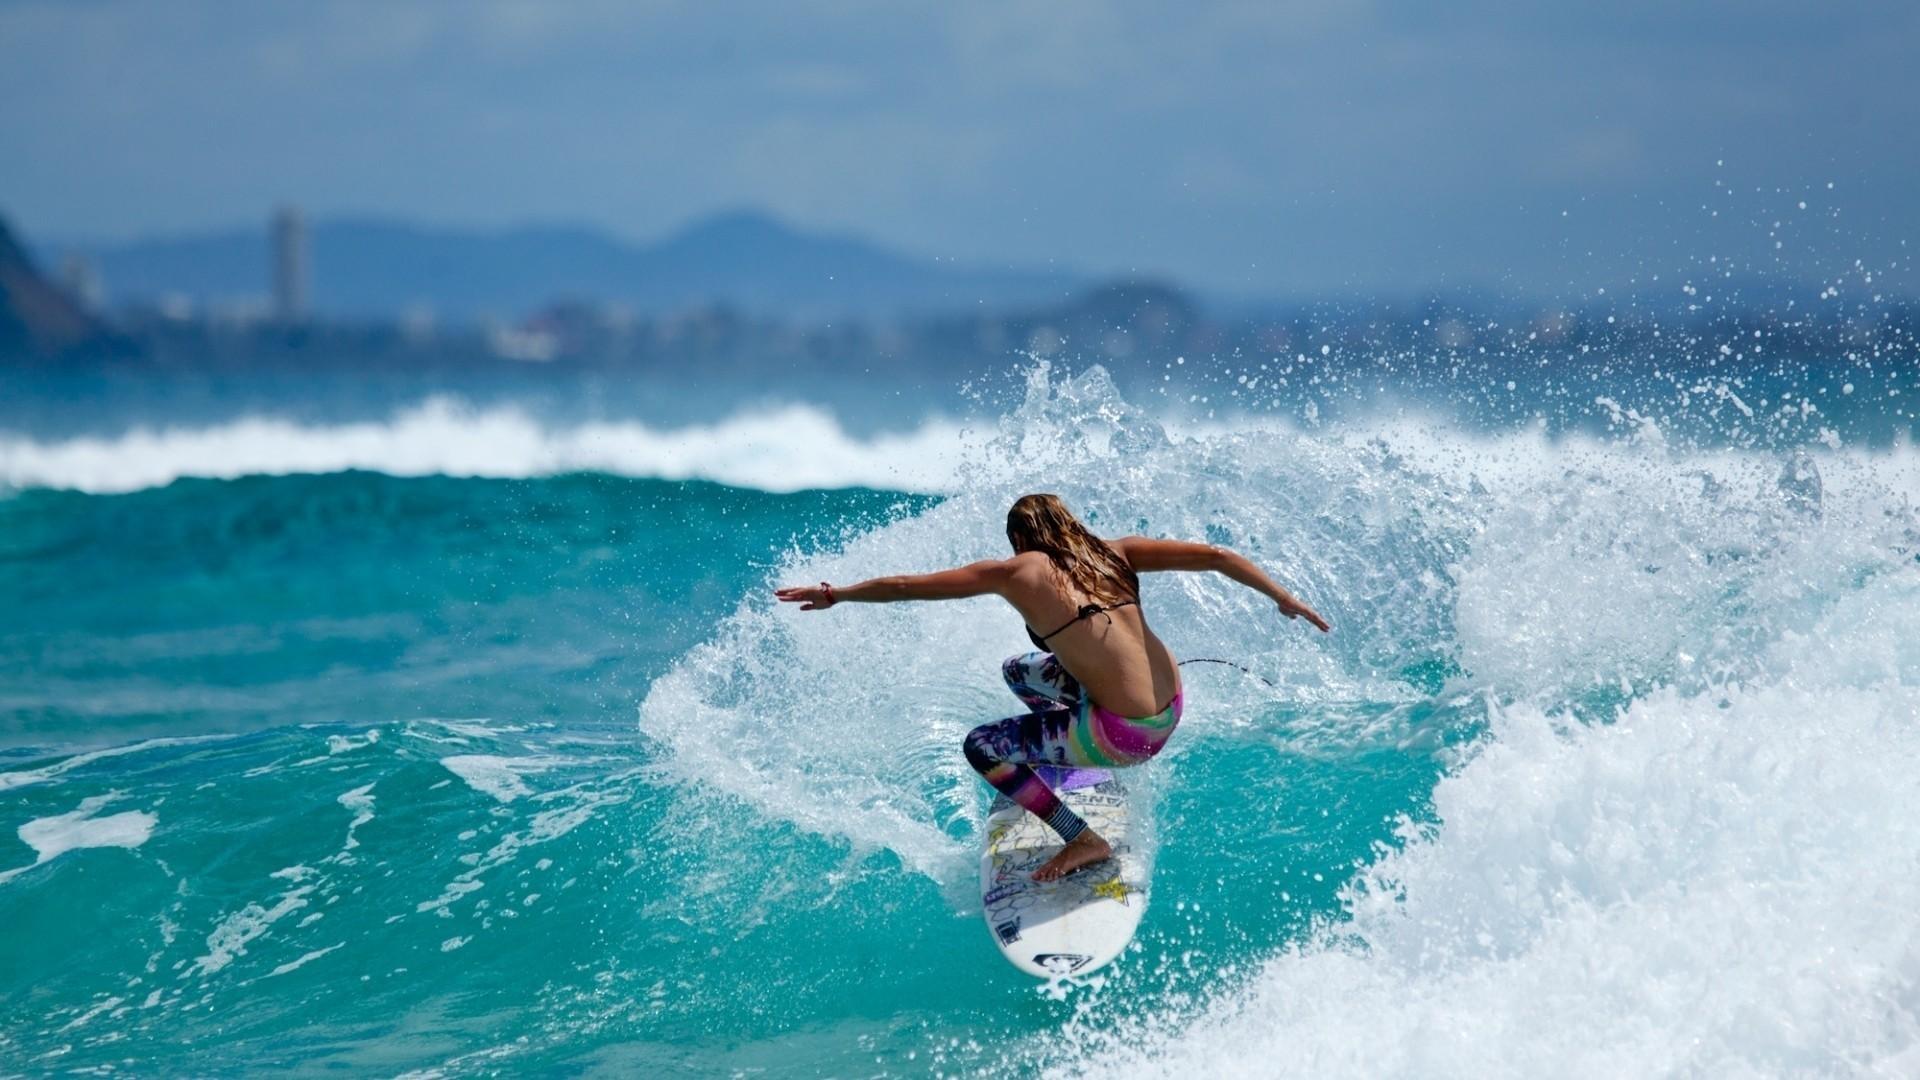 Women Surfing. Sport Wallpaper for Android